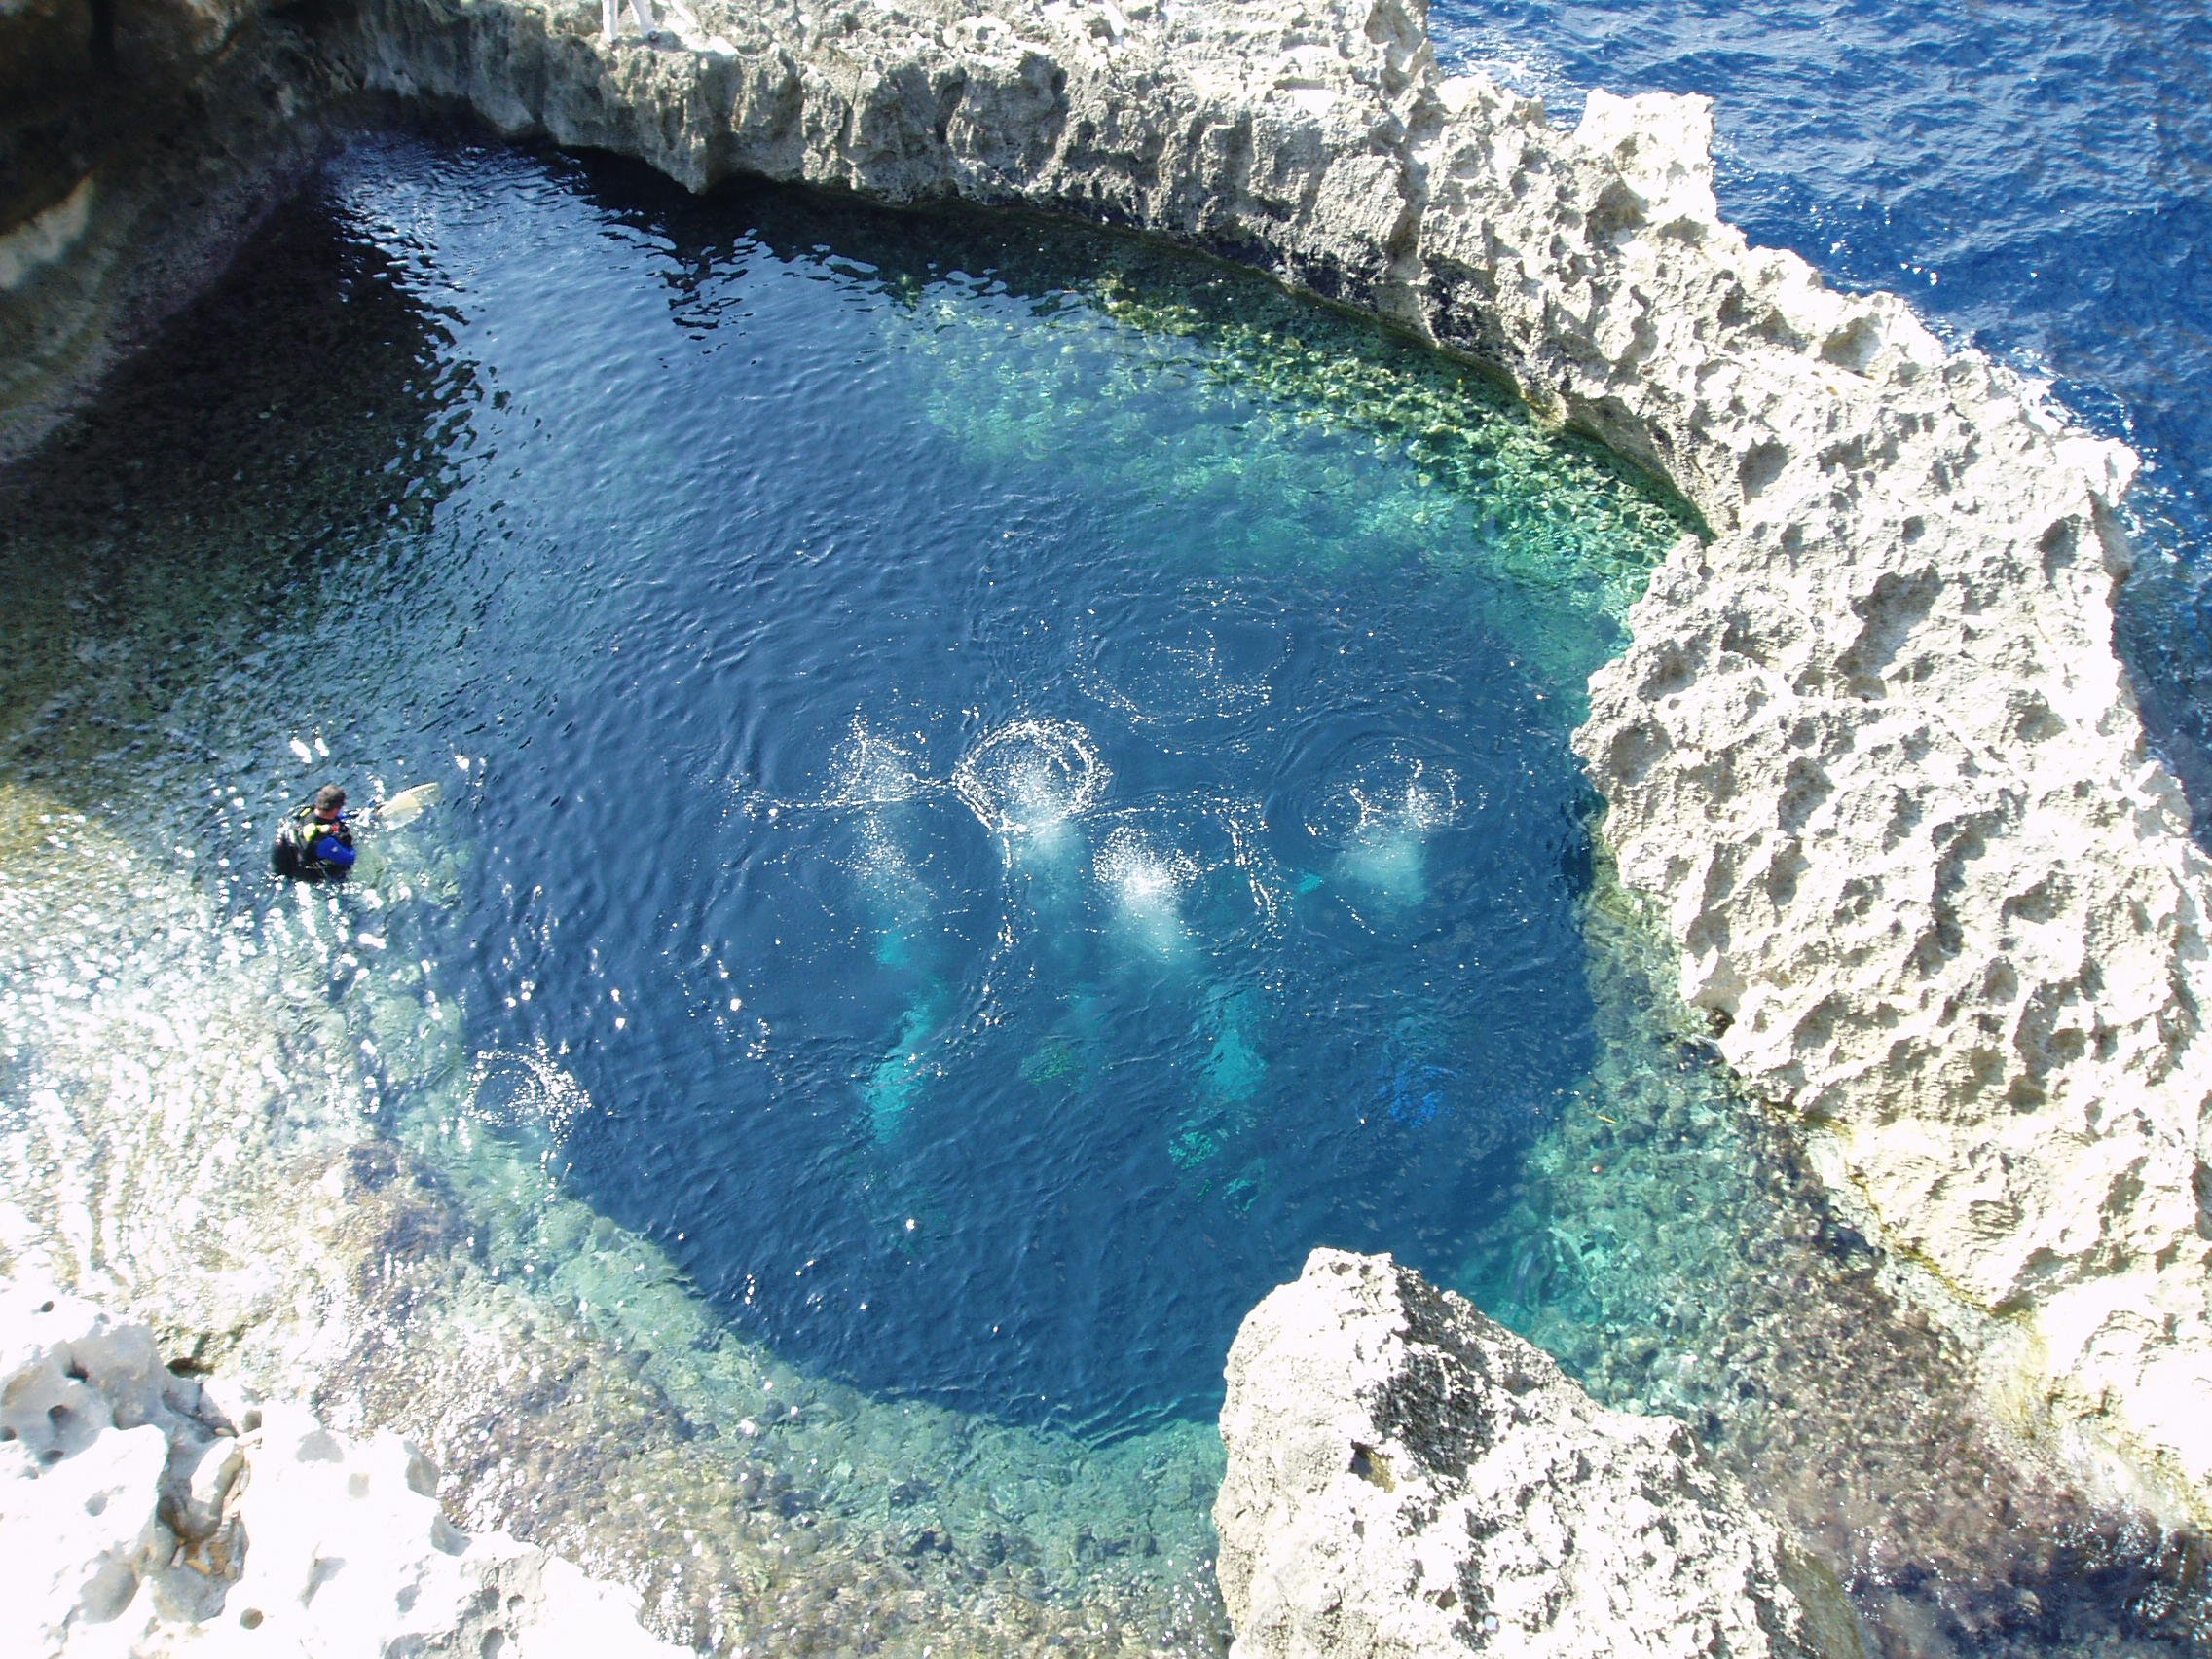 blue hole from top.jpg